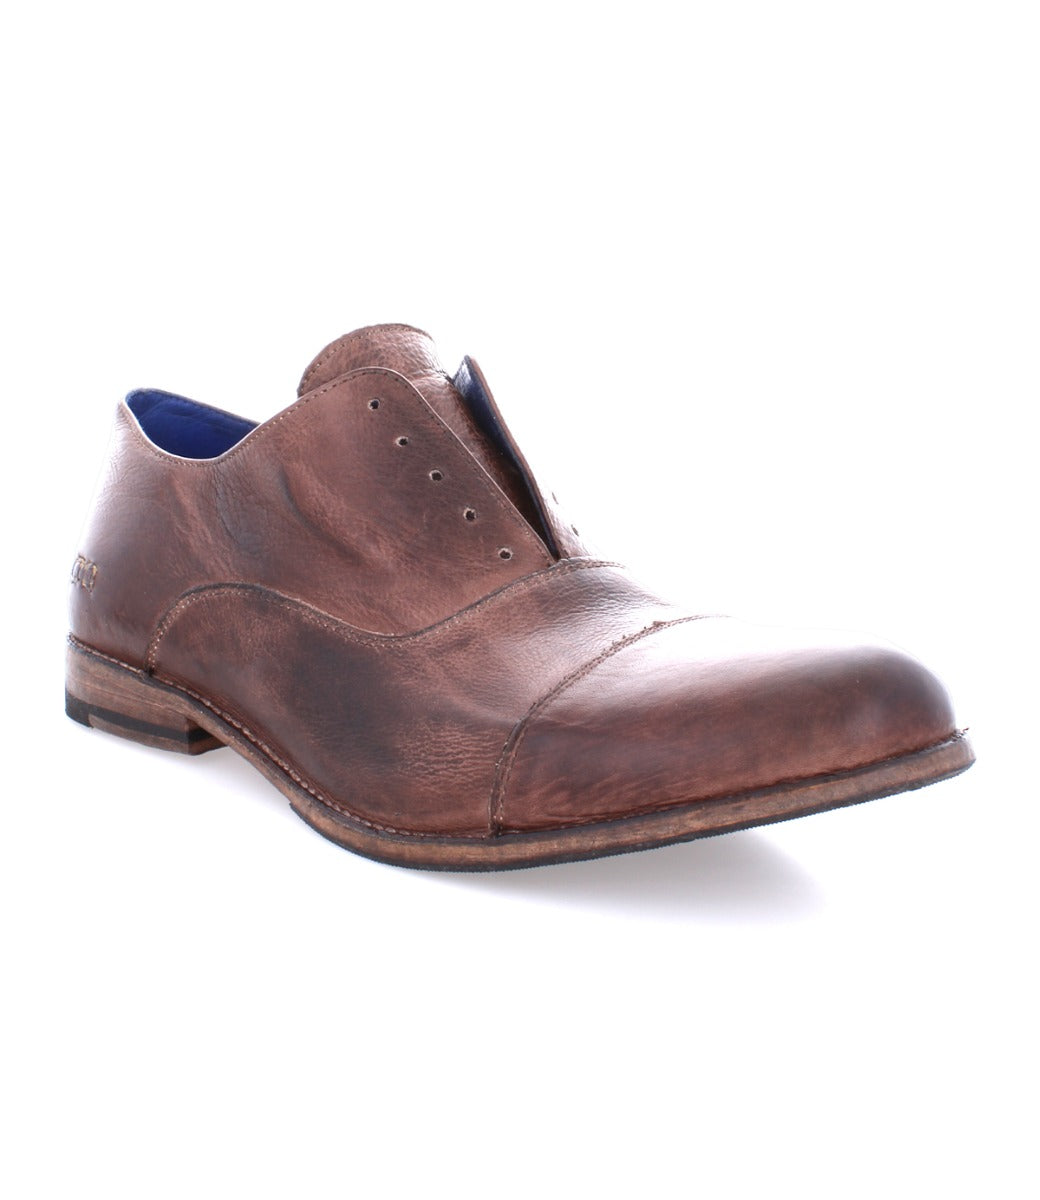 A men's brown leather Bed Stu Thorn oxford shoe on a white background.